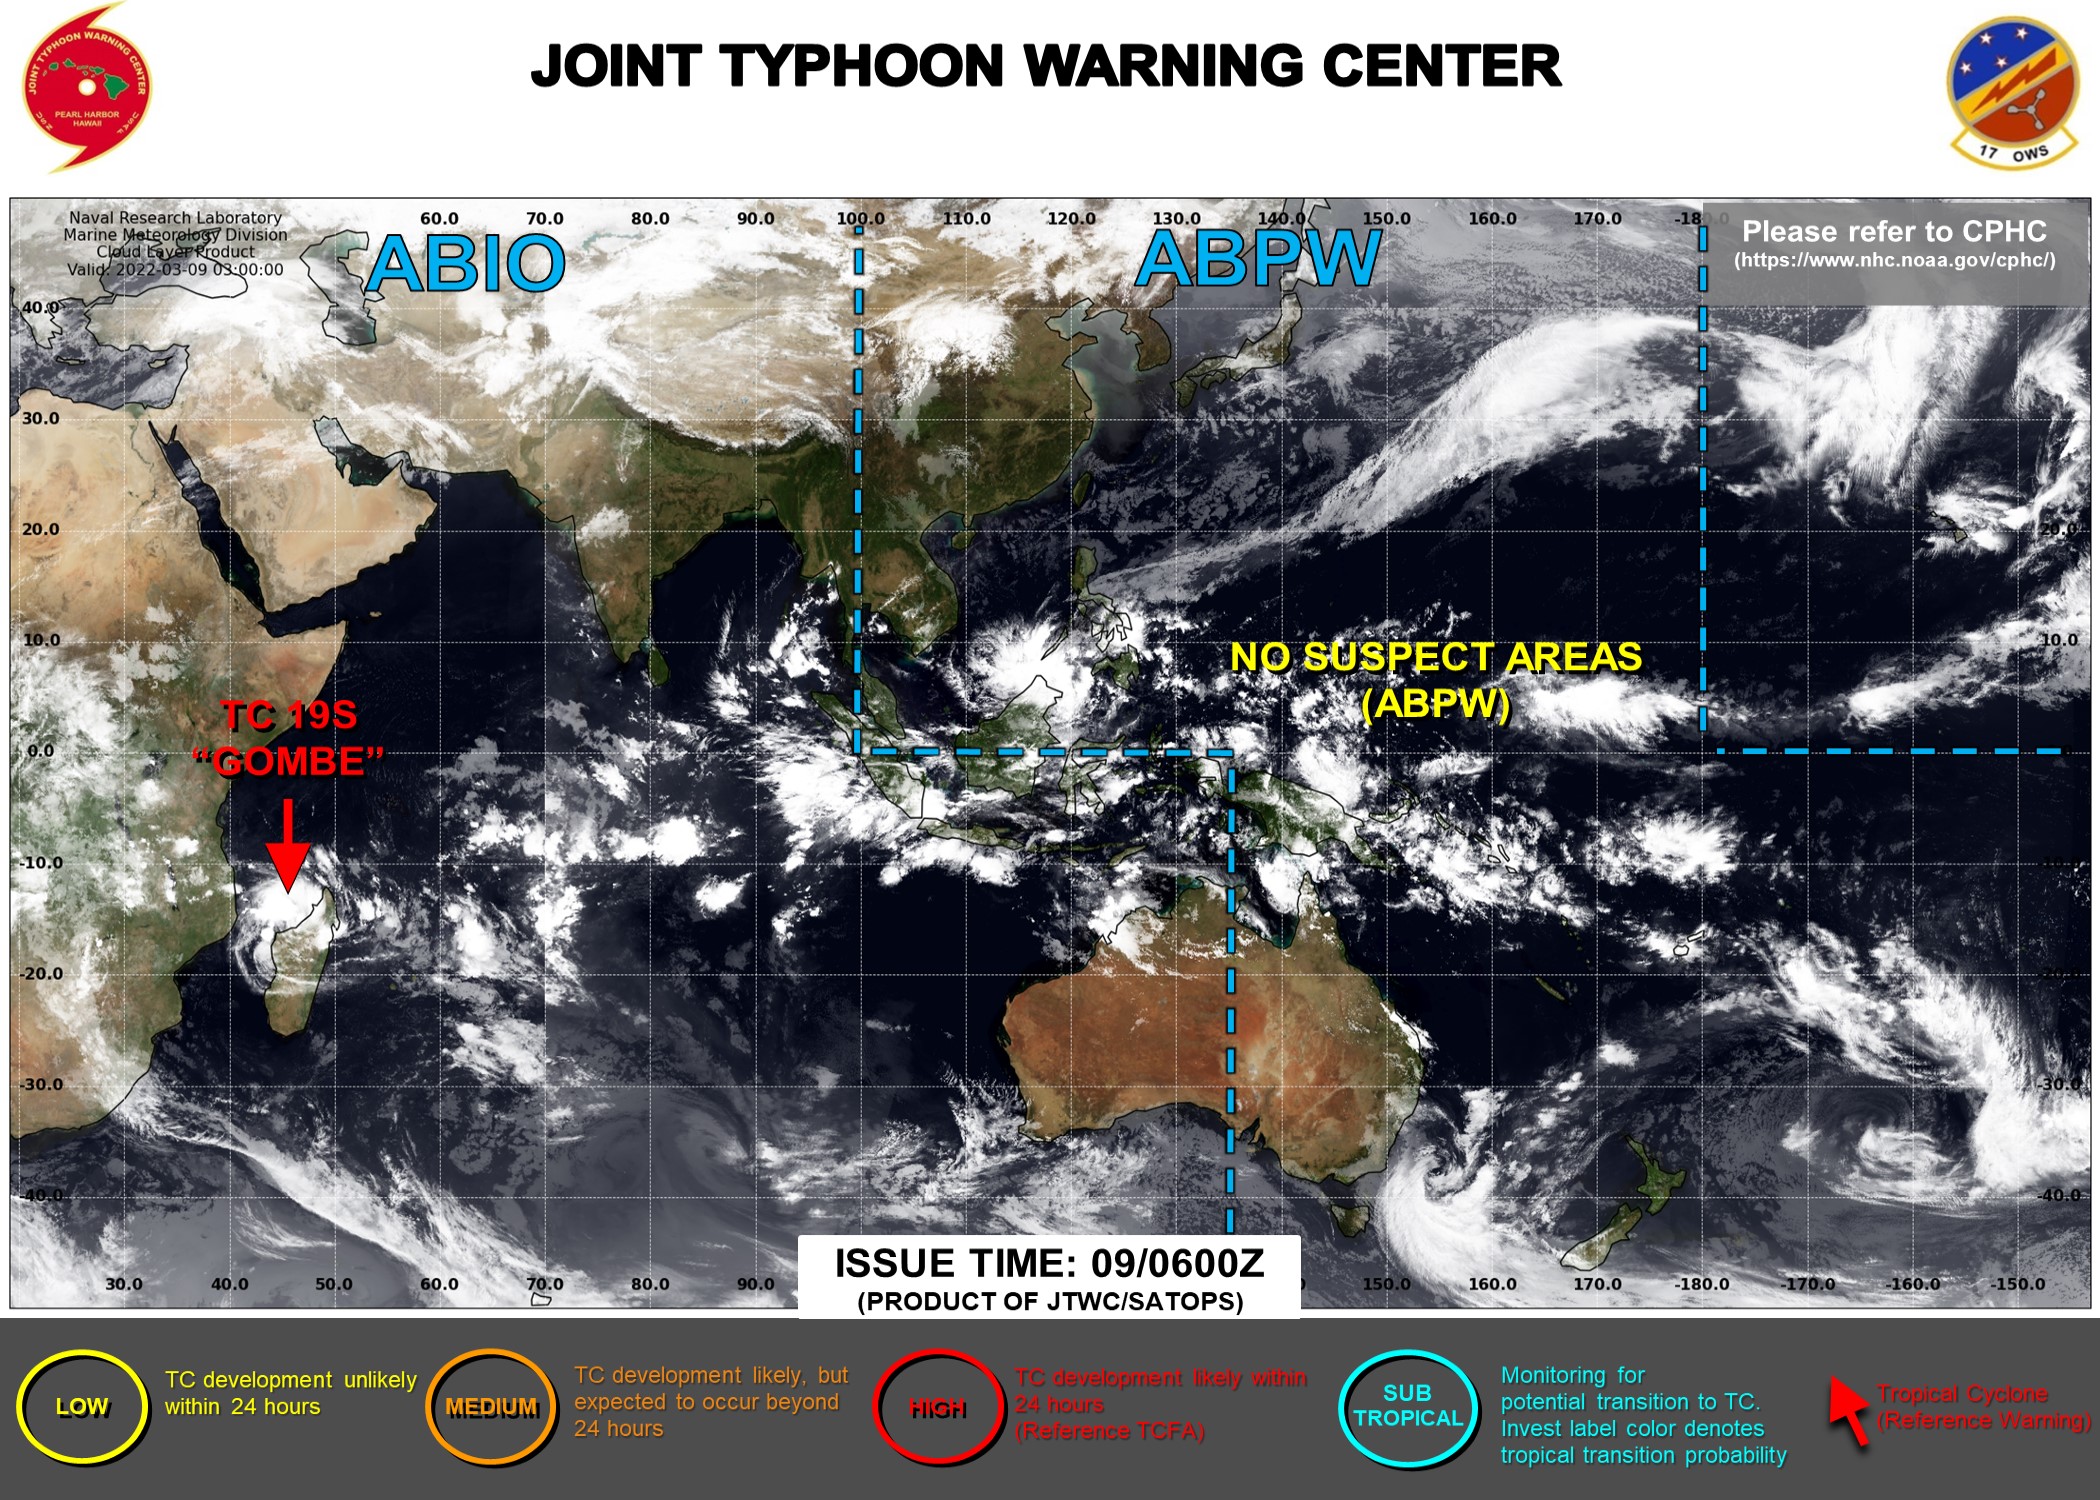 JTWC IS ISSUING 12HOURLY WARNINGS AND 3HOURLY SATELLITE BULLETINS ON TC 19S(GOMBE).